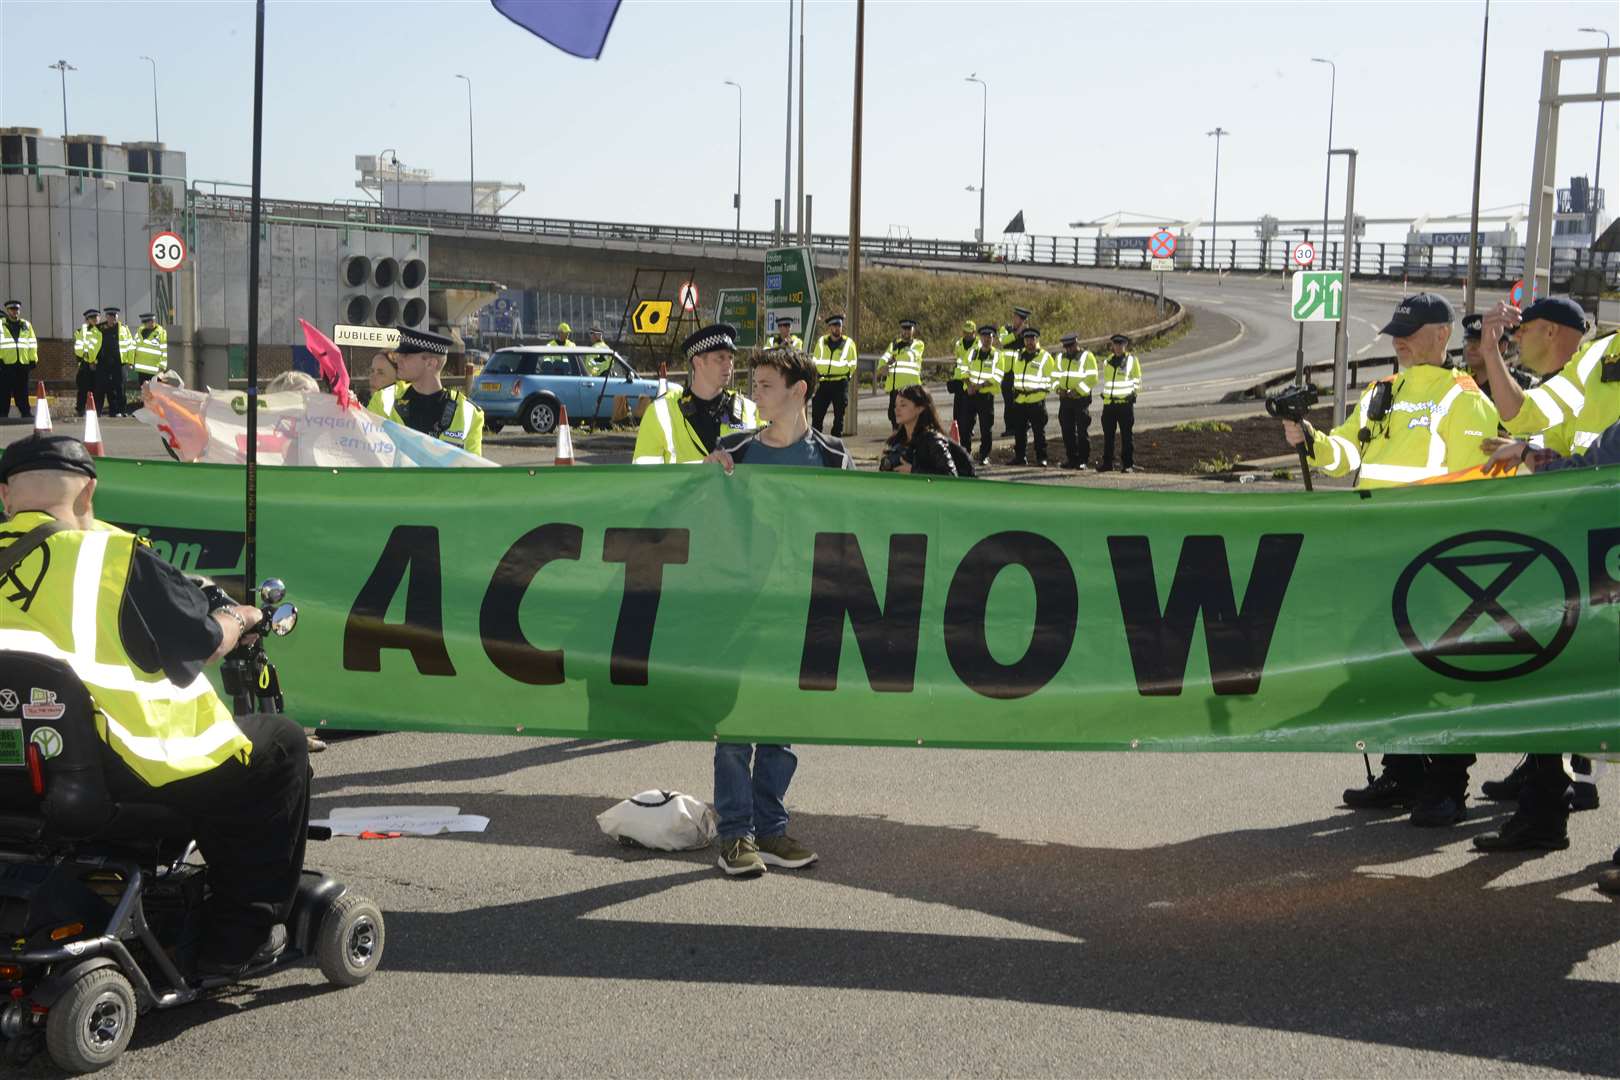 Dover Townwall street to Dover docks Extinction Rebellion protest.A small number block the ntrance to the docks.Picture: Paul Amos. (19904799)